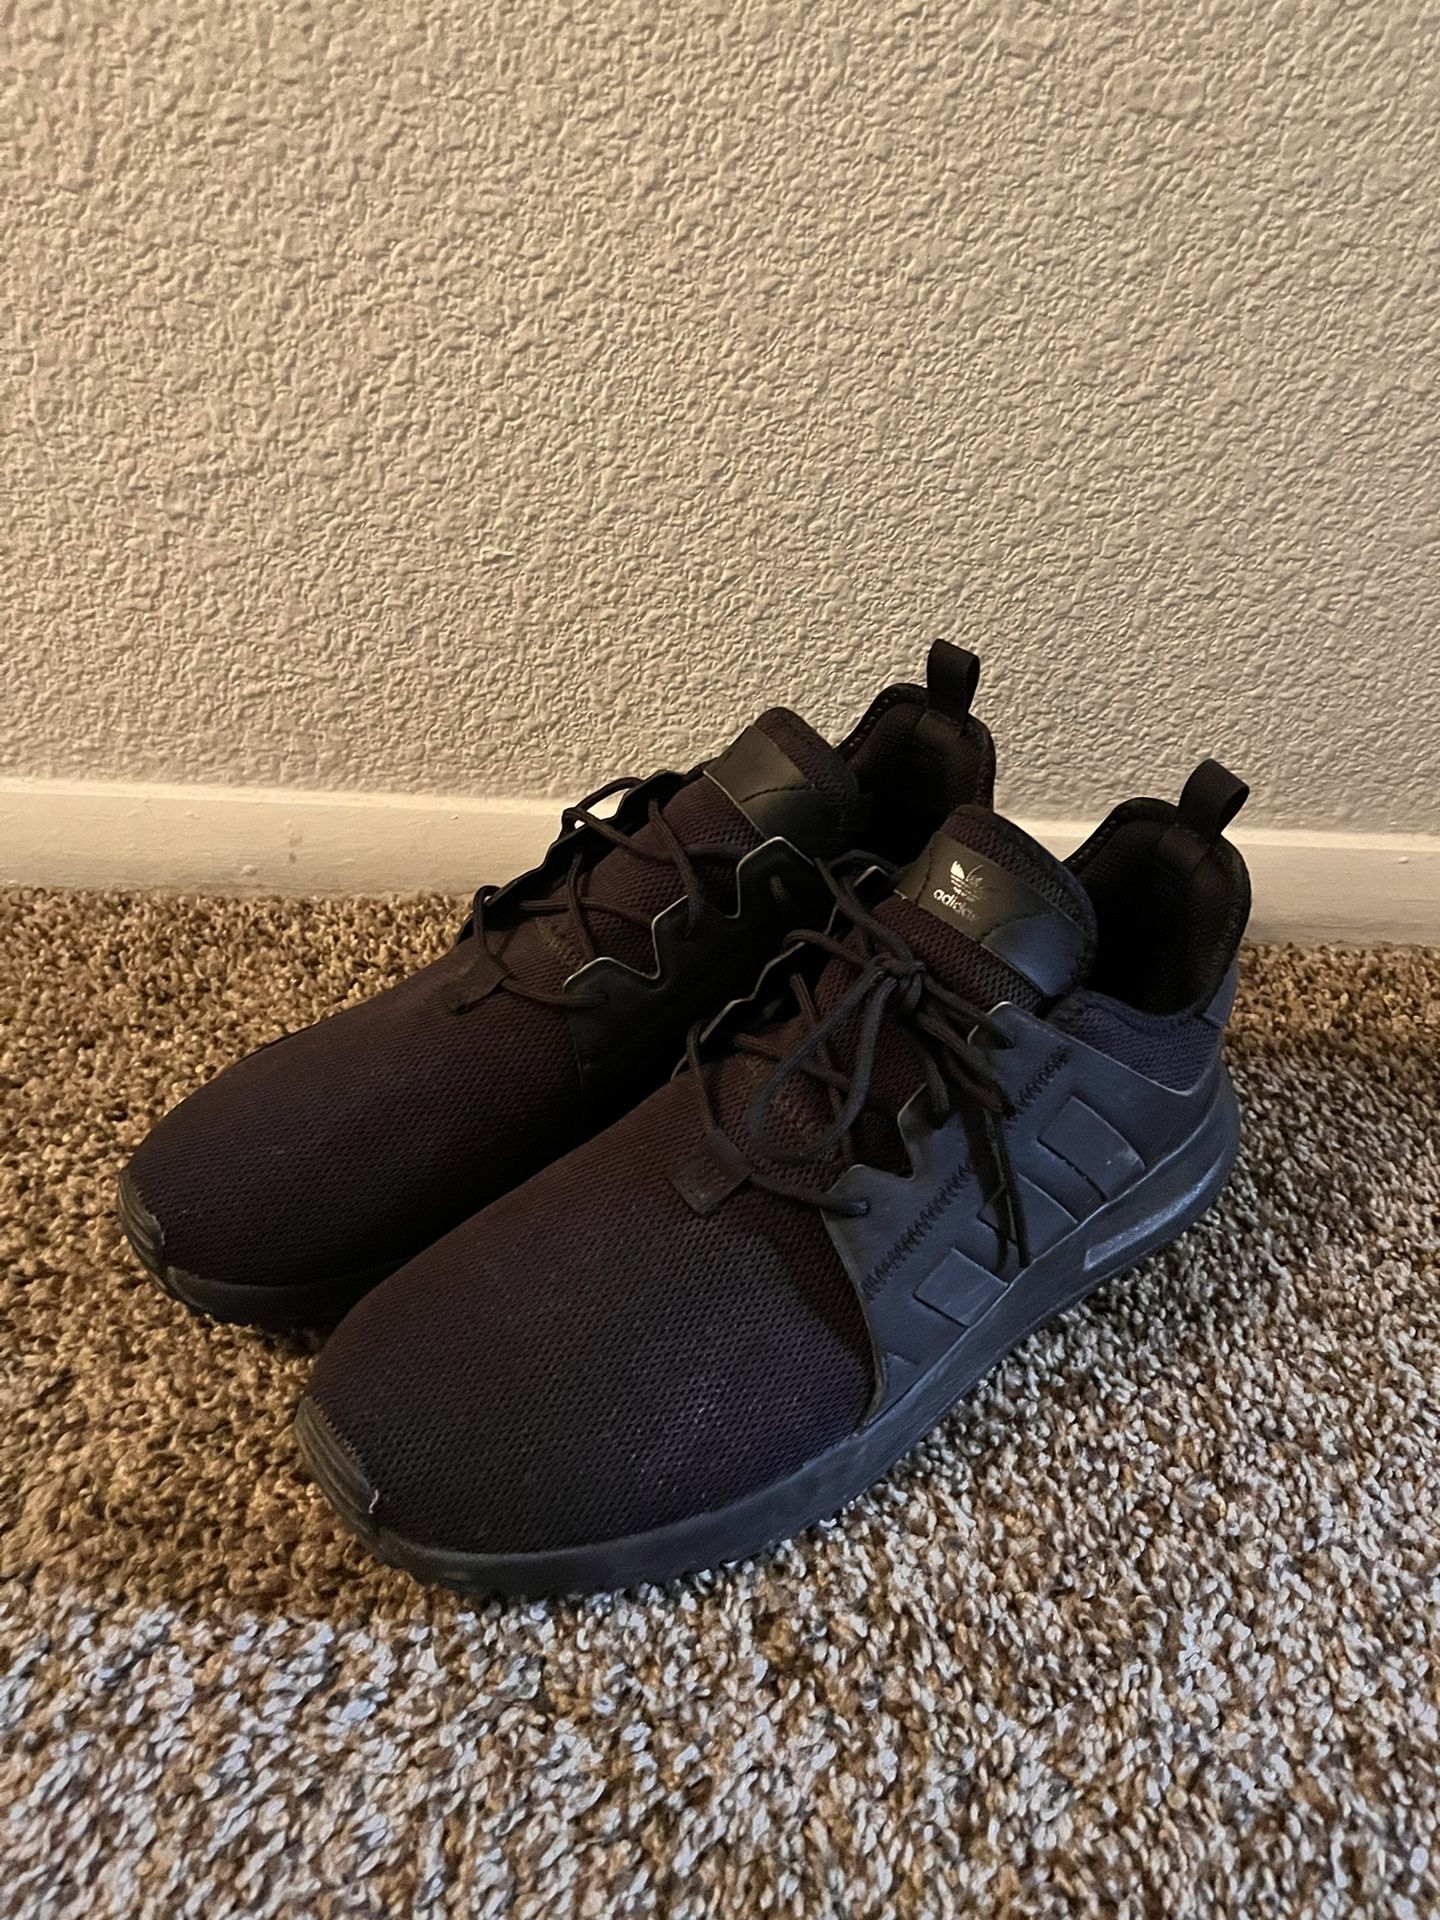 Adidas Ultraboost shoes size 11.5 $40